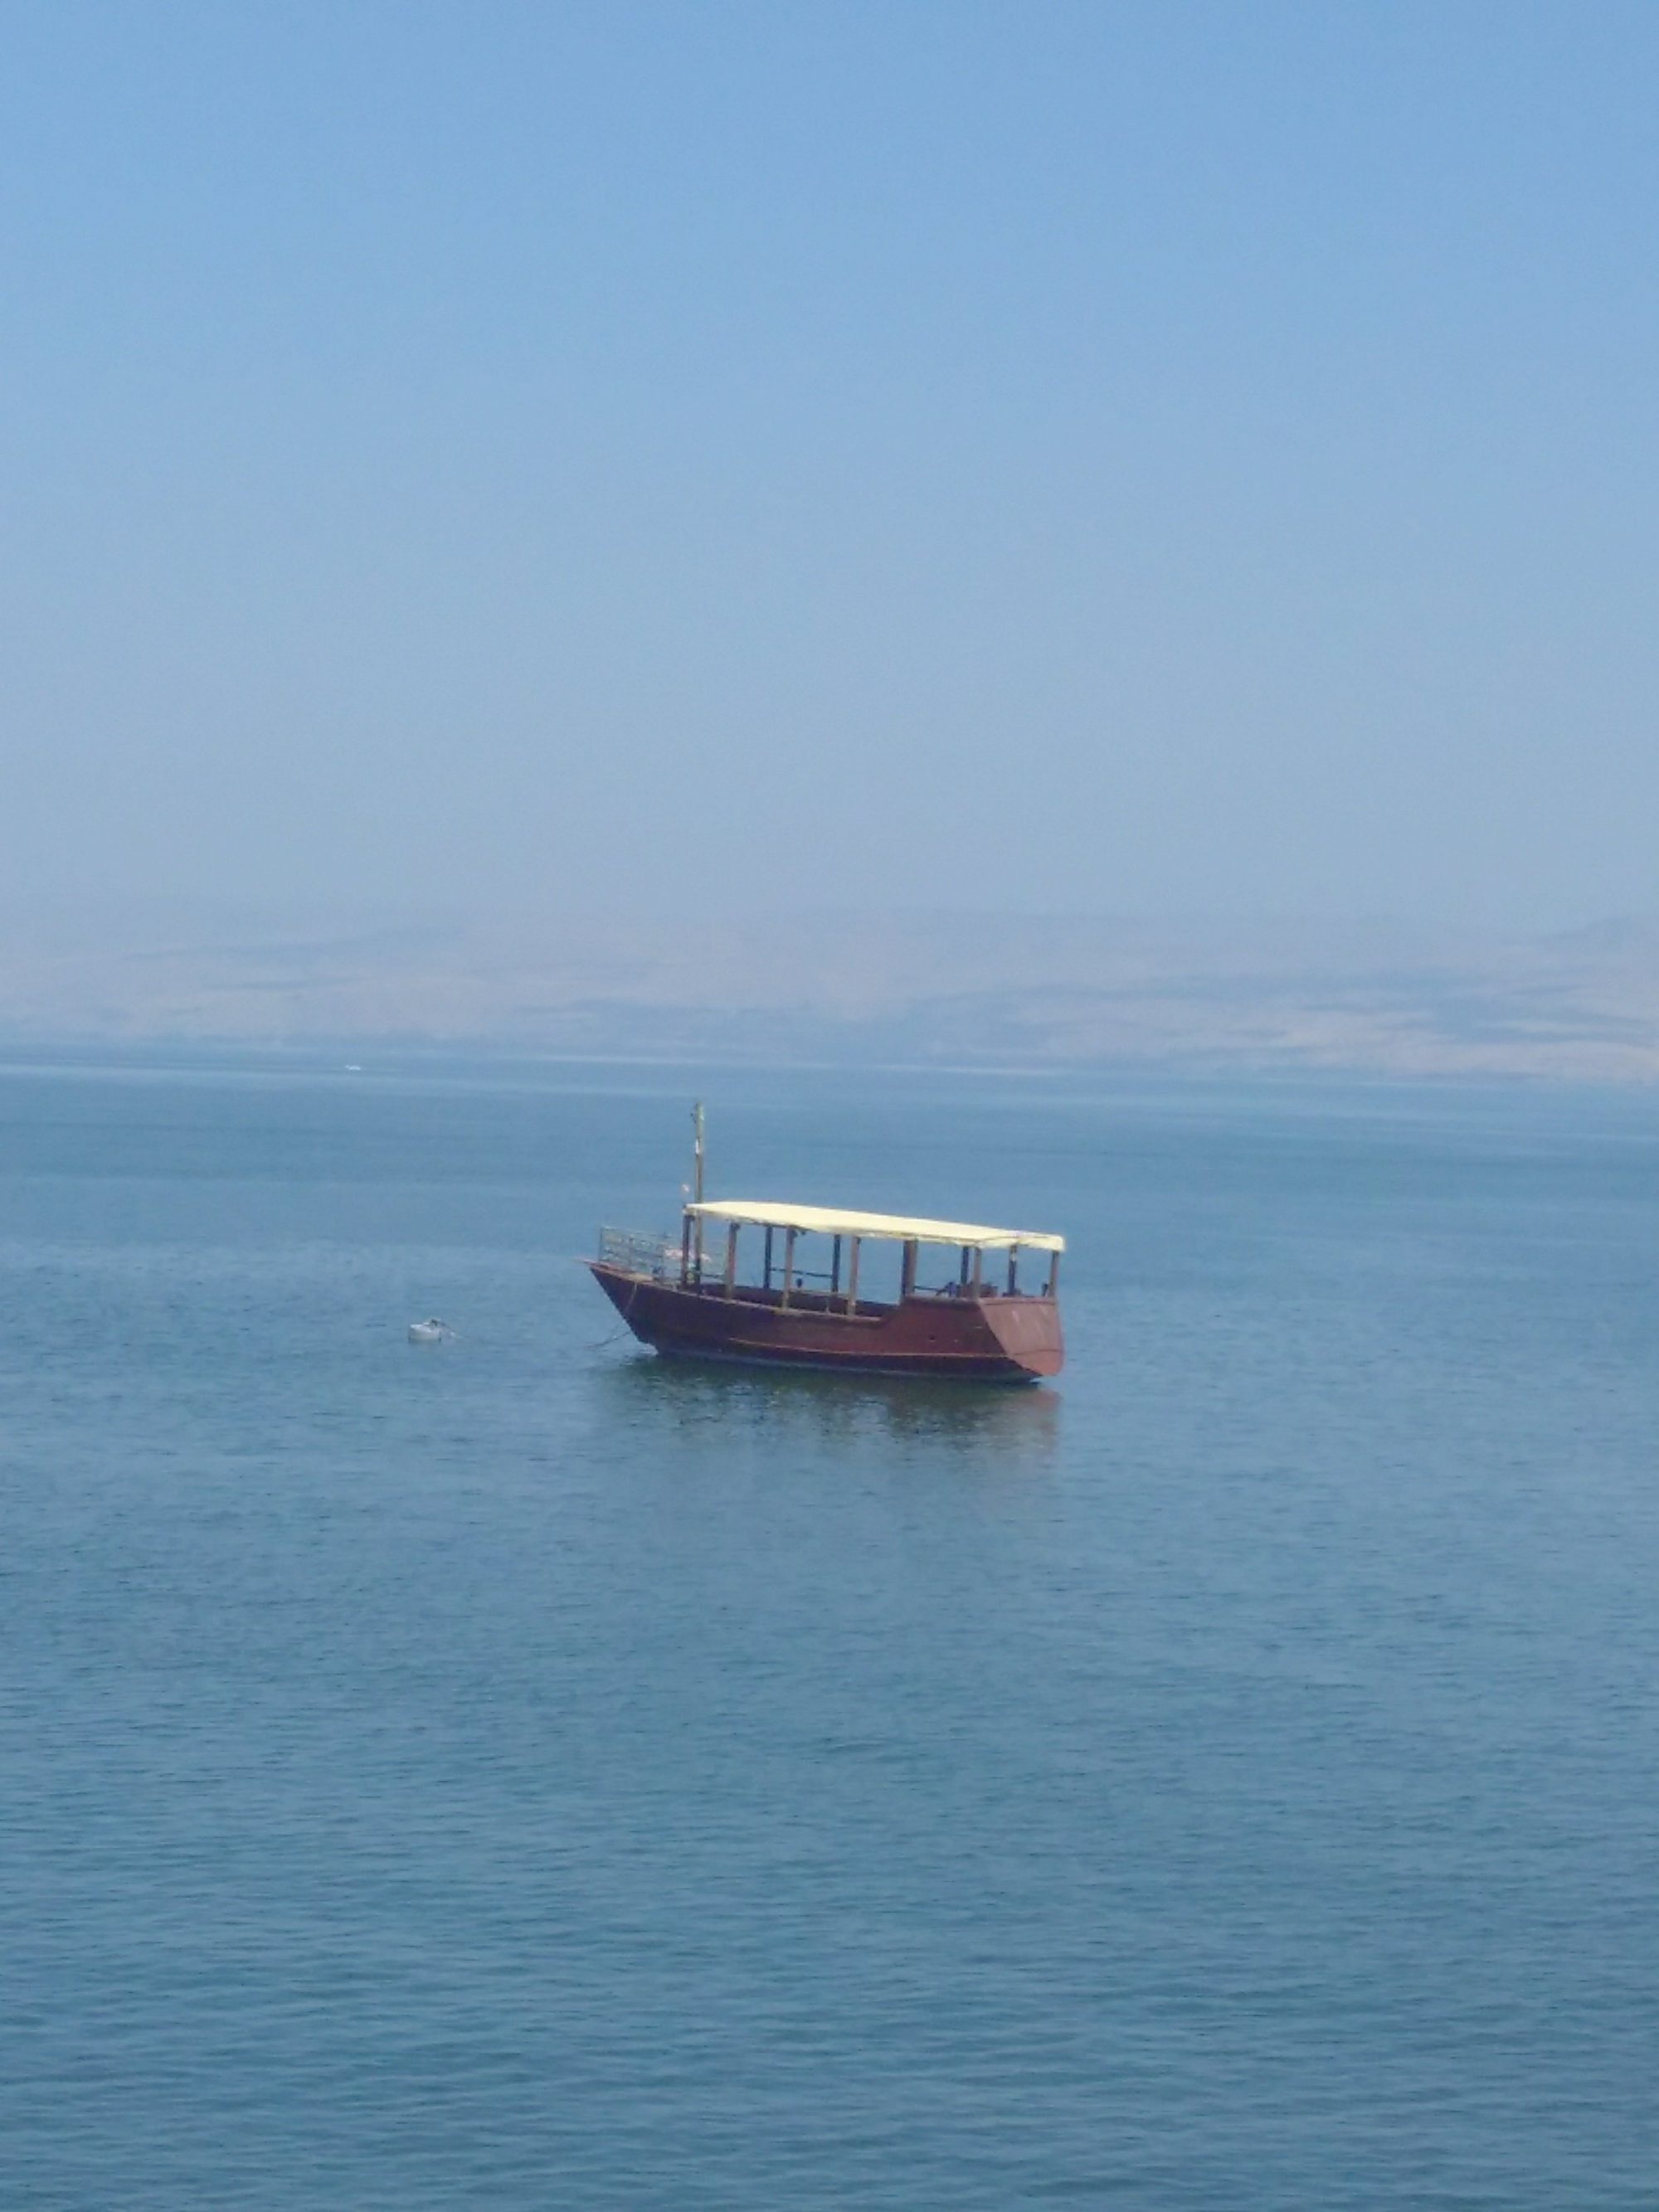 Boat floating on the Sea of Galilee